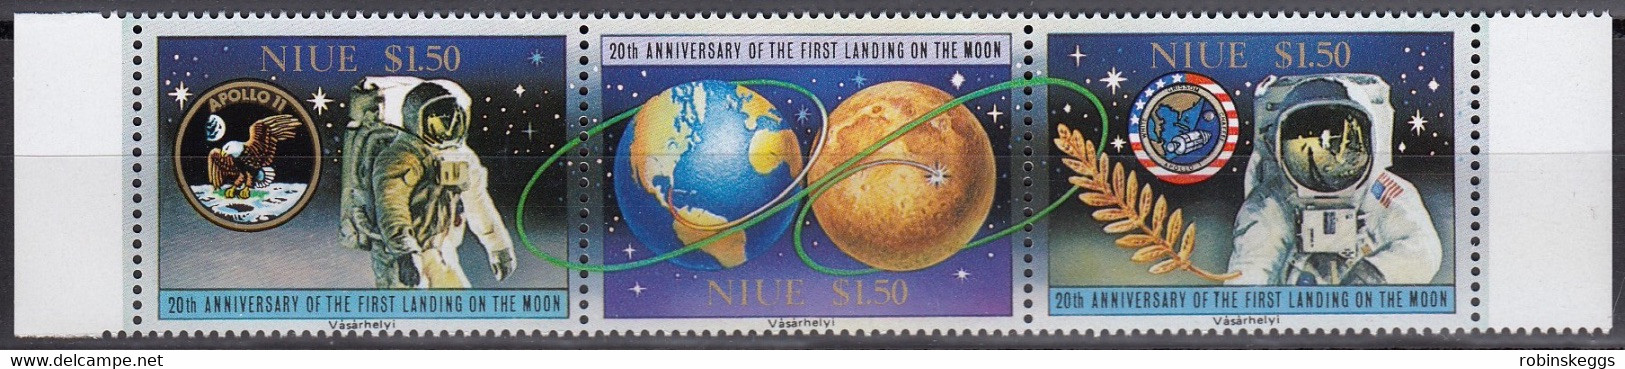 NIUE 1989 First Manned Moon Landing 20th Anniversary, Strip Of 3 MNH - Oceanië